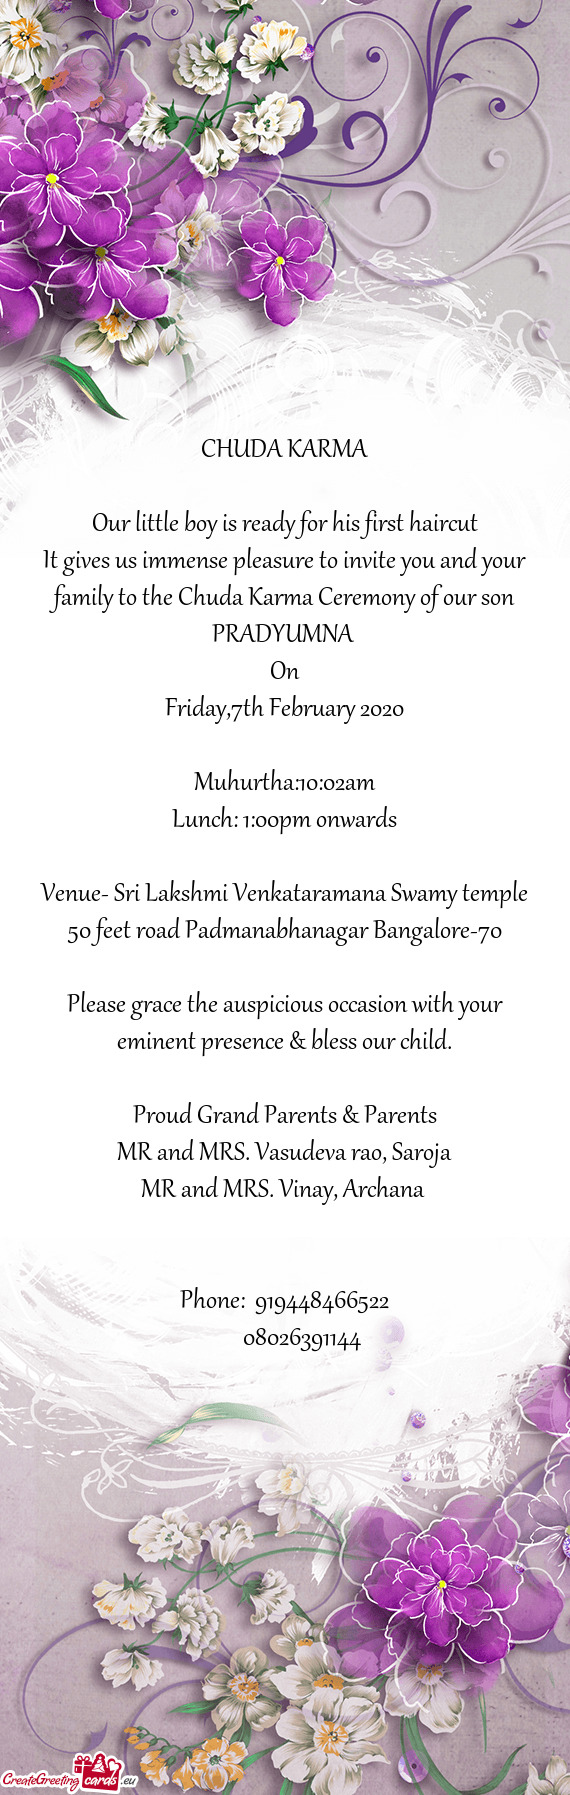 It gives us immense pleasure to invite you and your family to the Chuda Karma Ceremony of our son